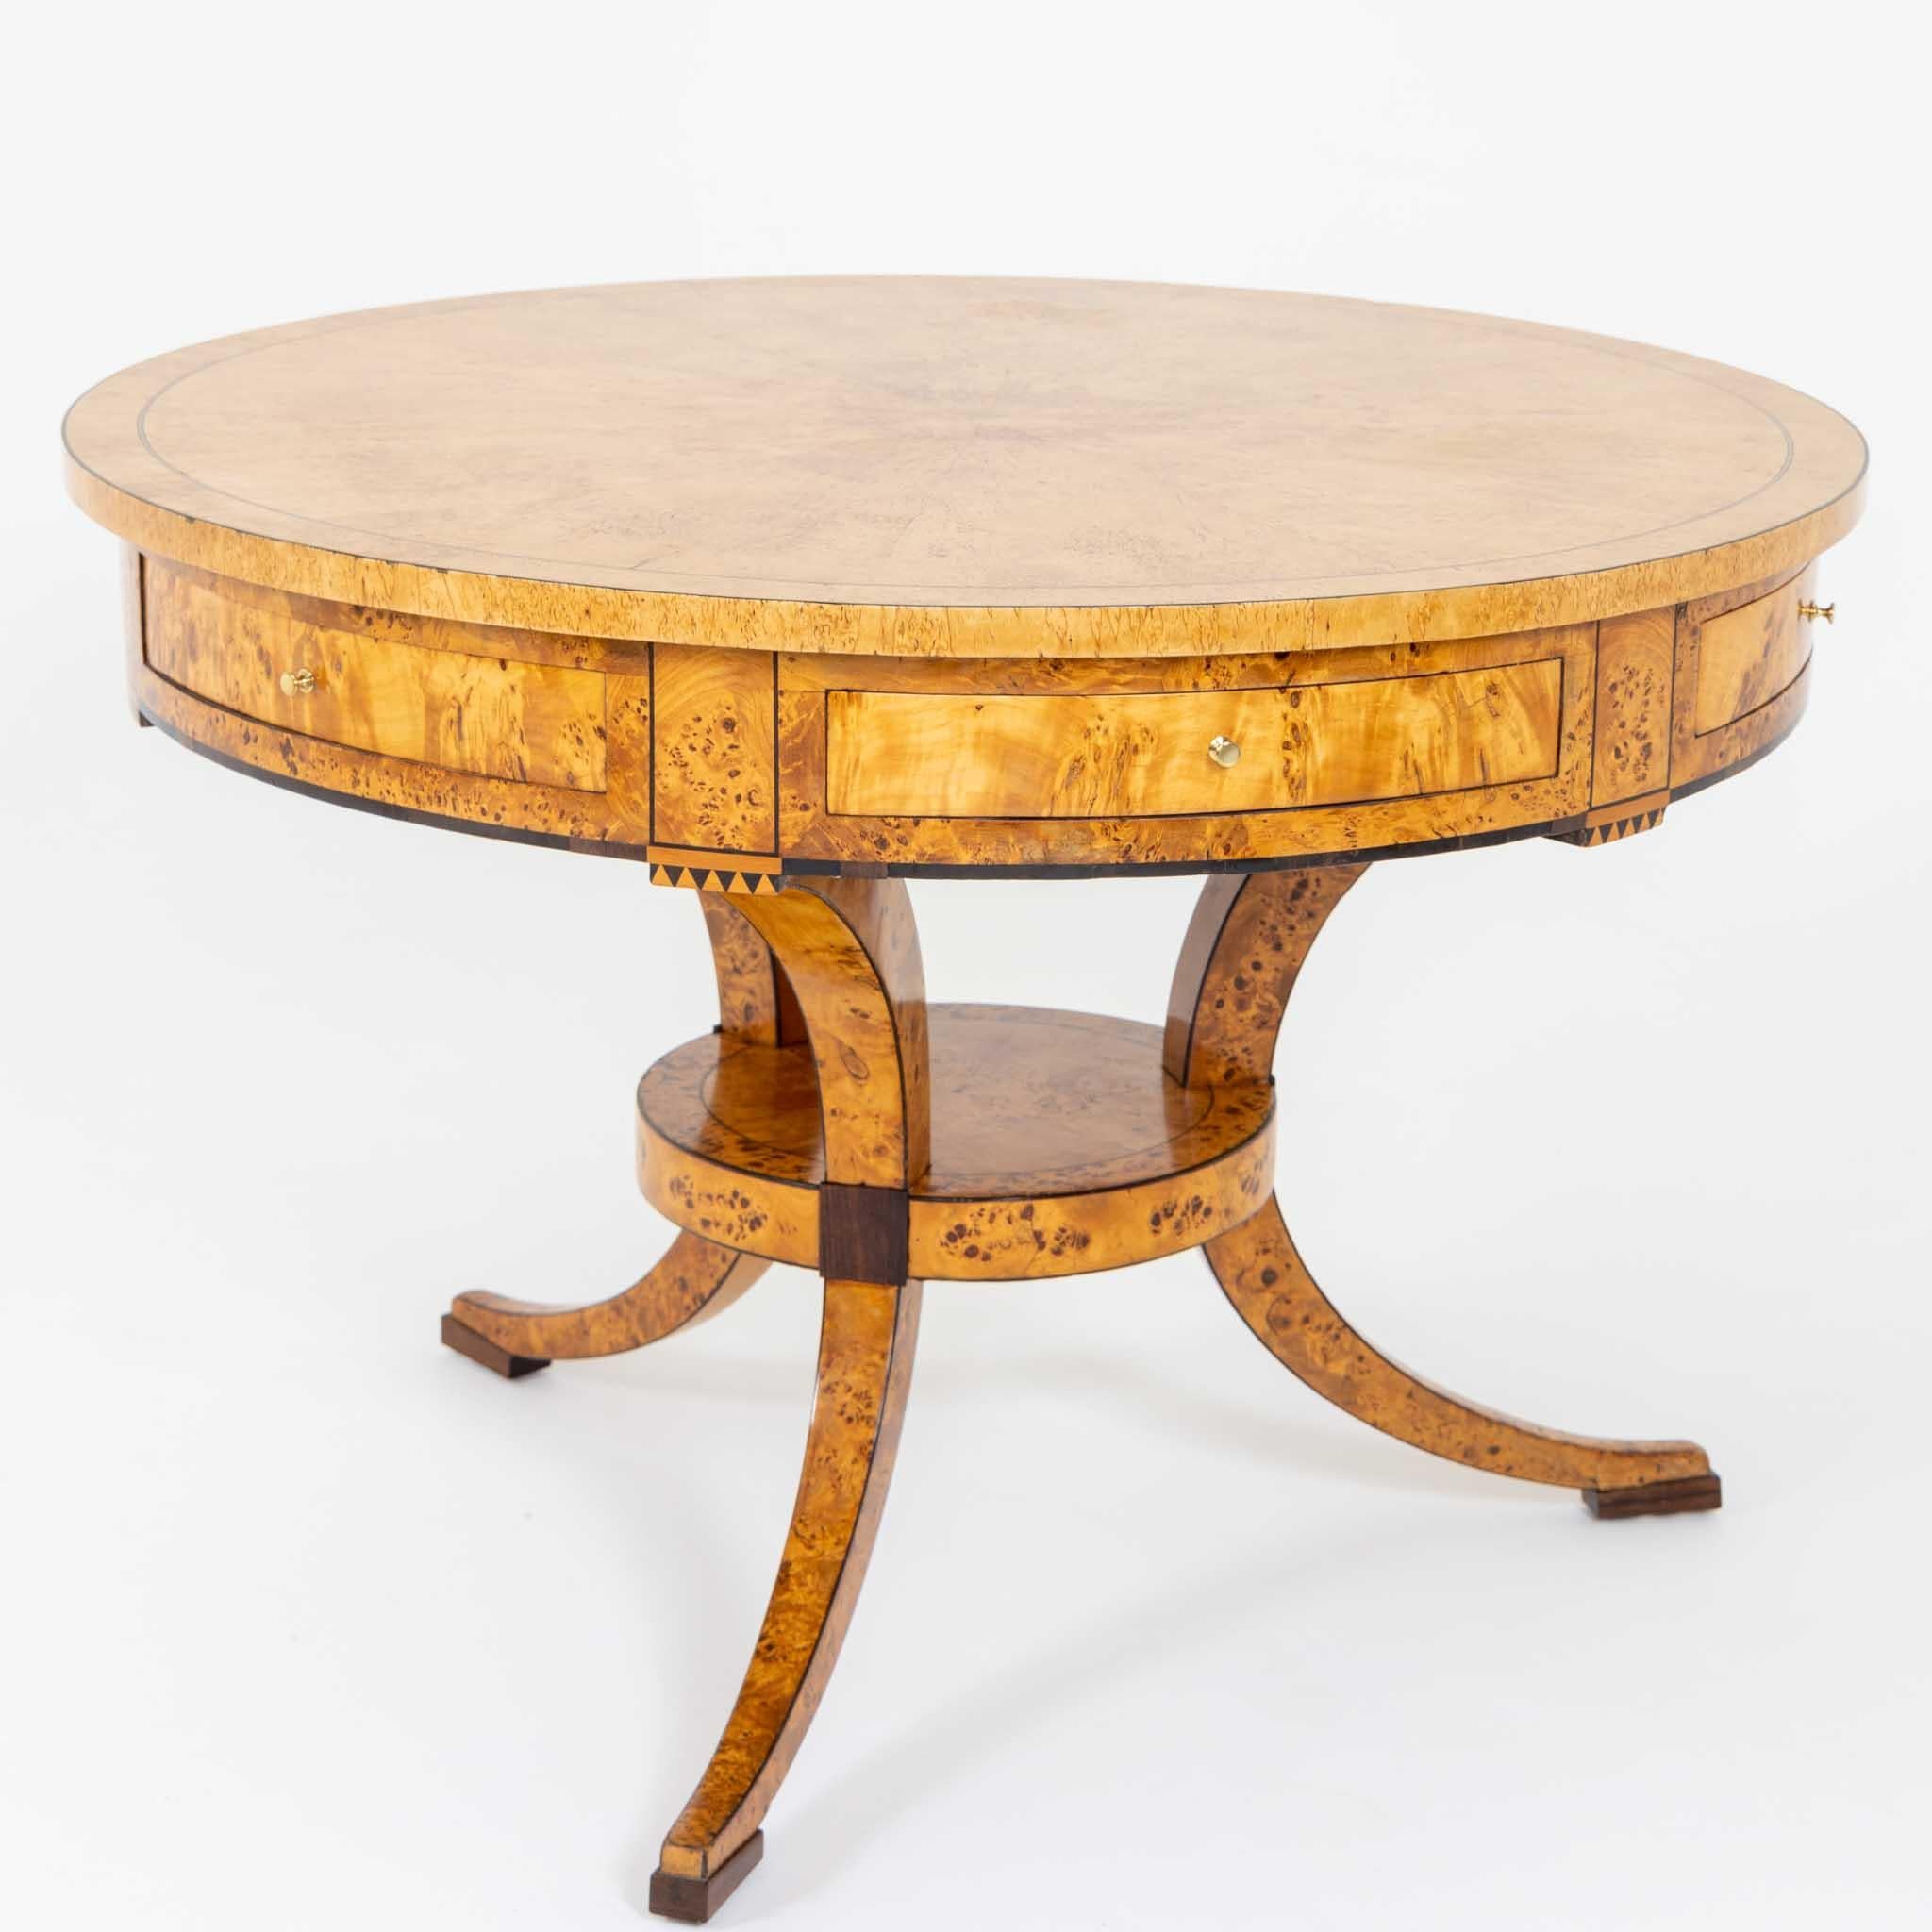 Biedermeier Game Table in Birch, Baltic States, early 19th Century For Sale 4